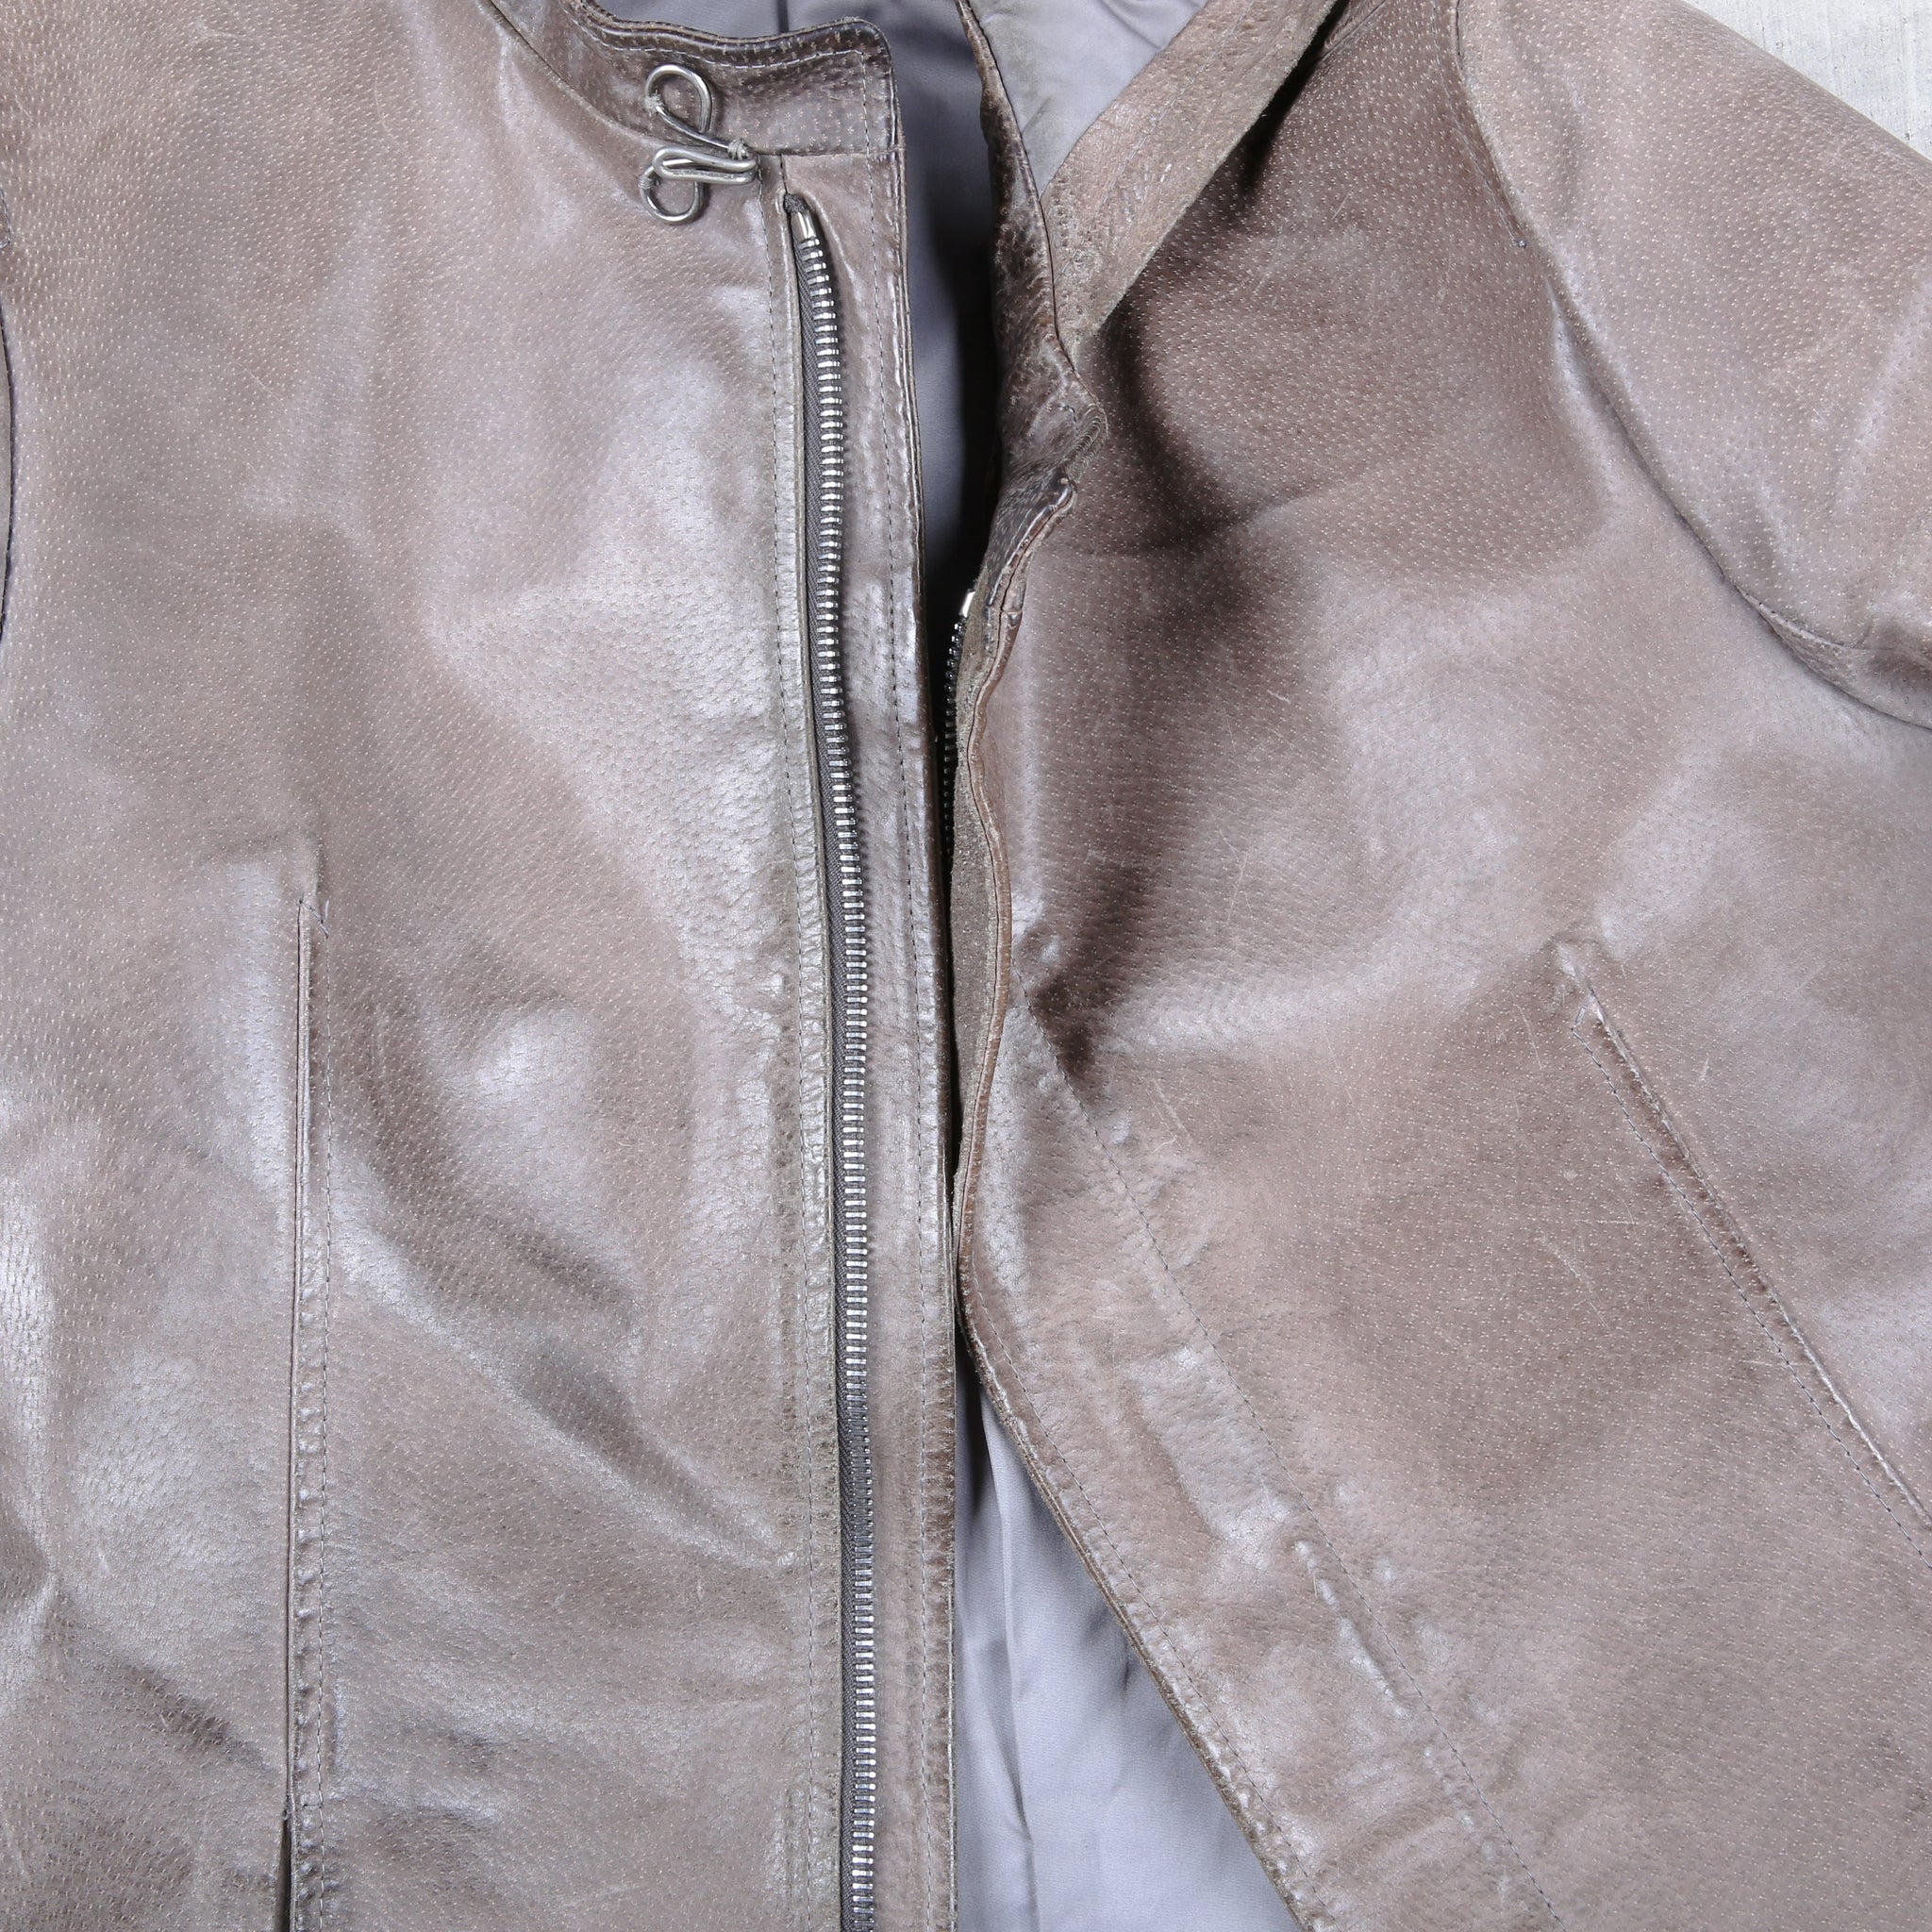 Carol Christian Poell AW97-98 Leather Jacket